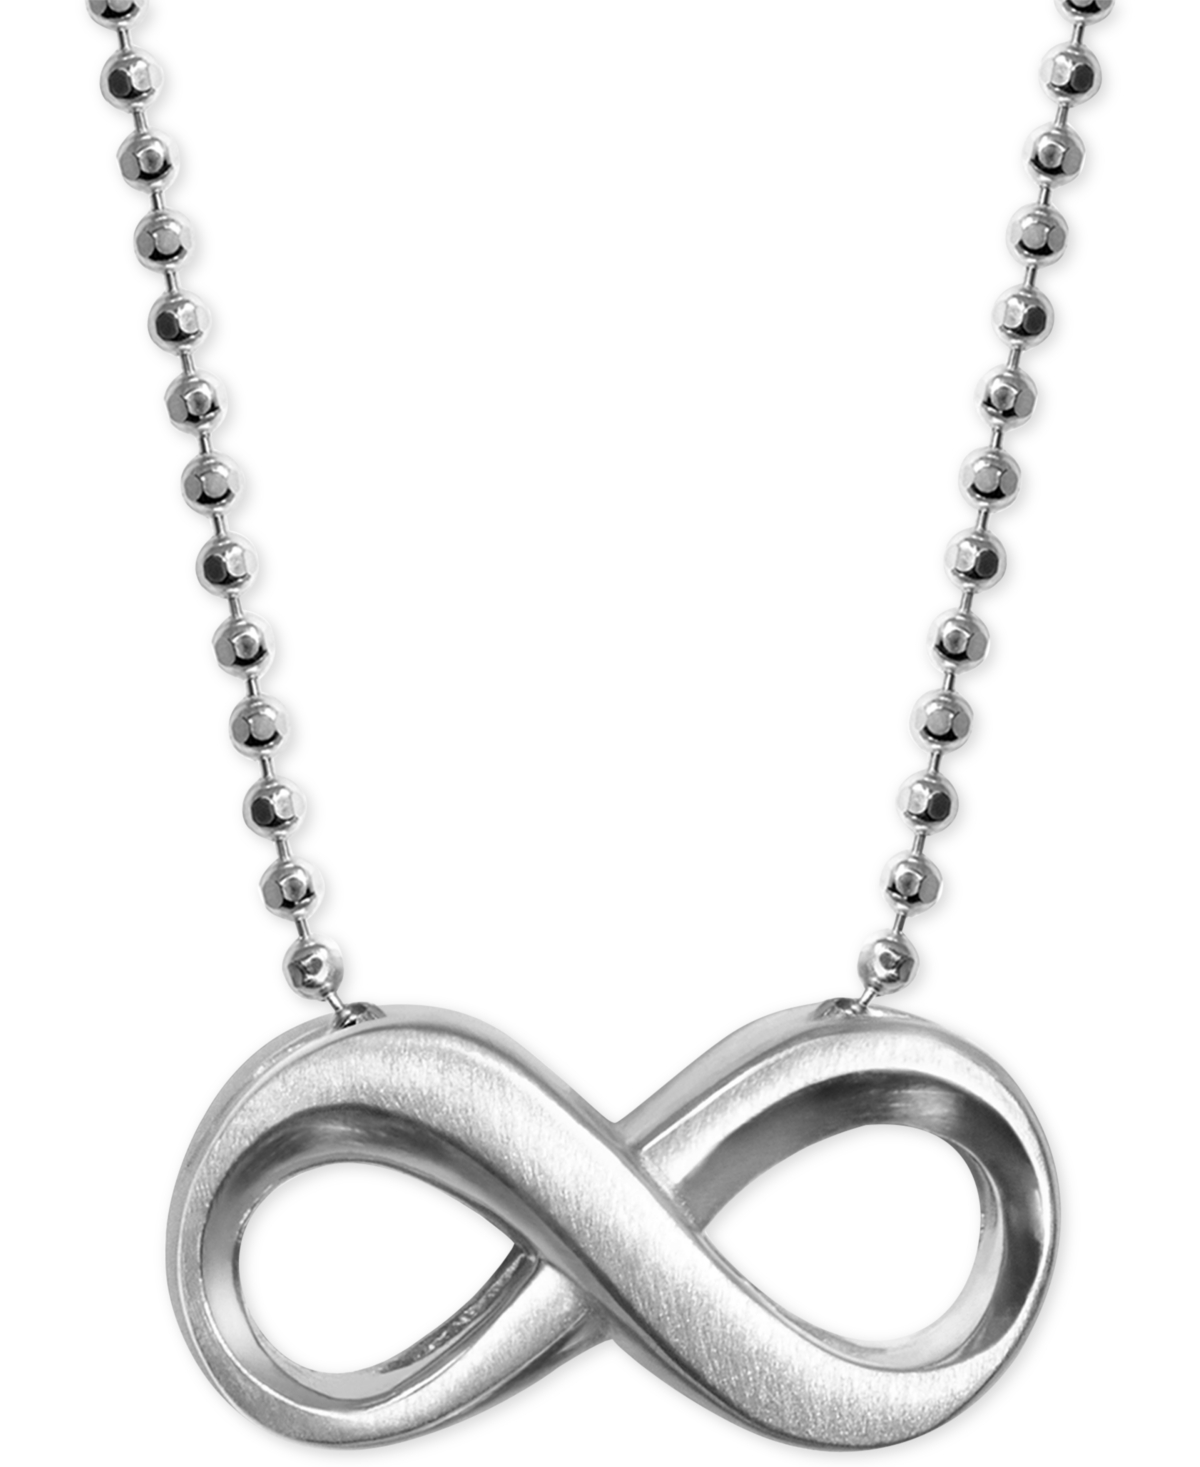 Infinity Pendant Necklace in Sterling Silver - Silver